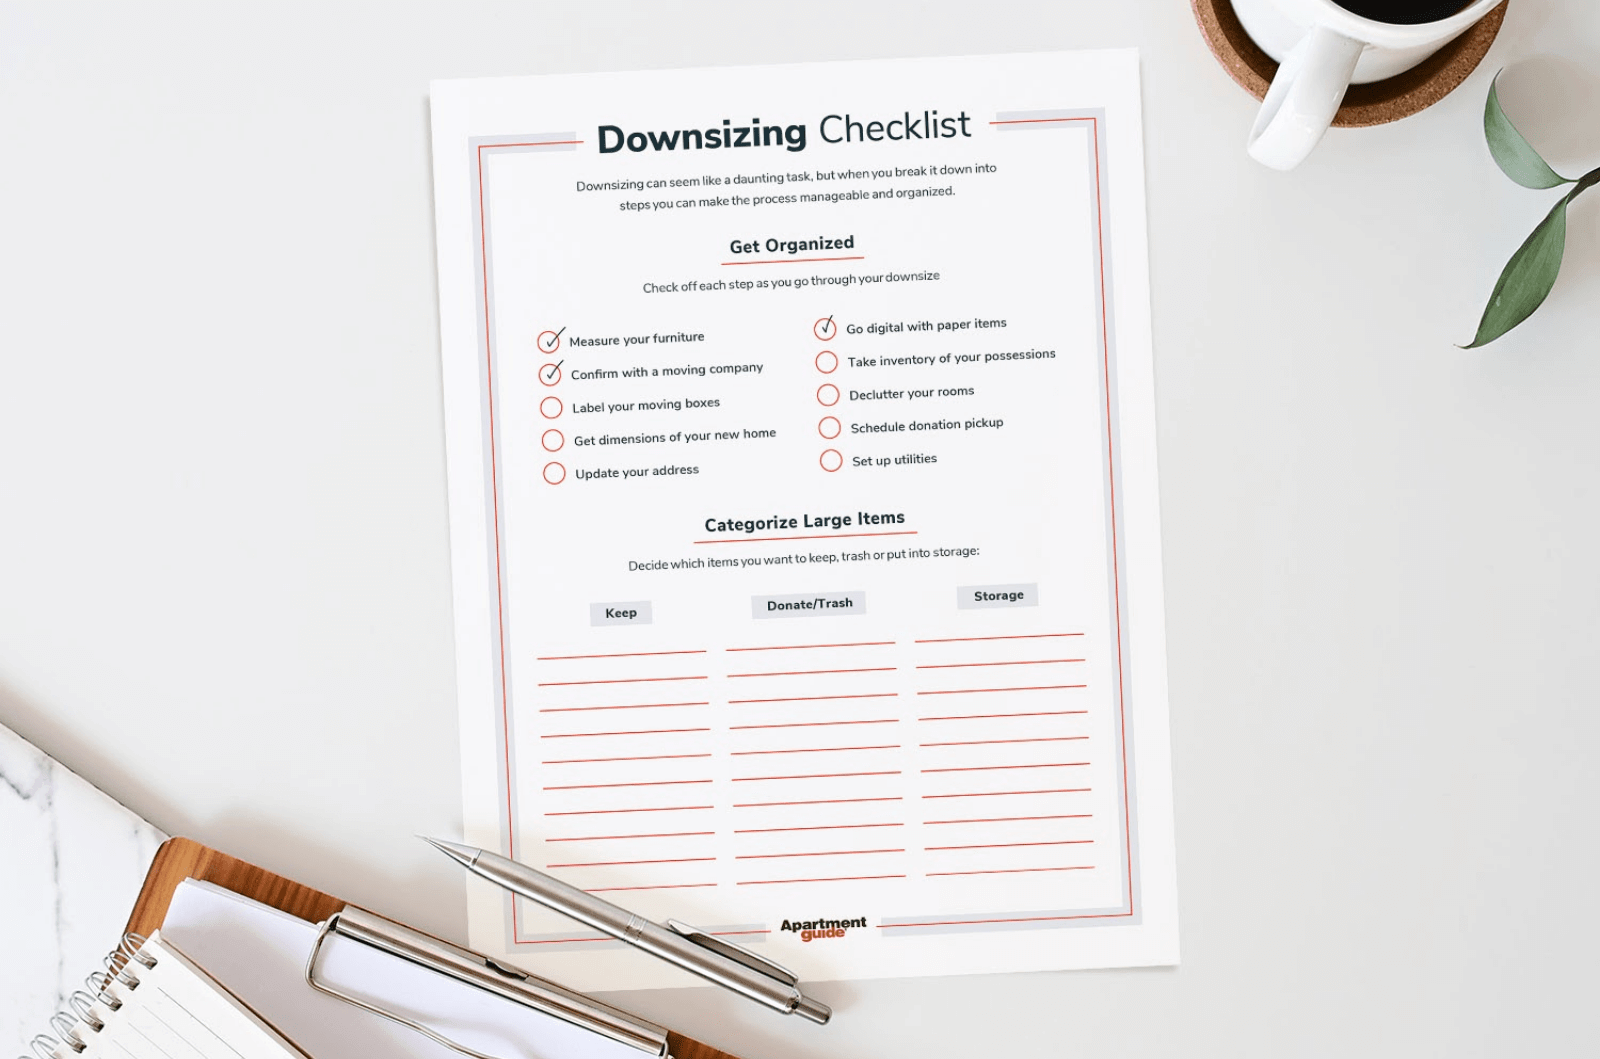 Downsizing Checklist: Steps To Staying Organized While Moving